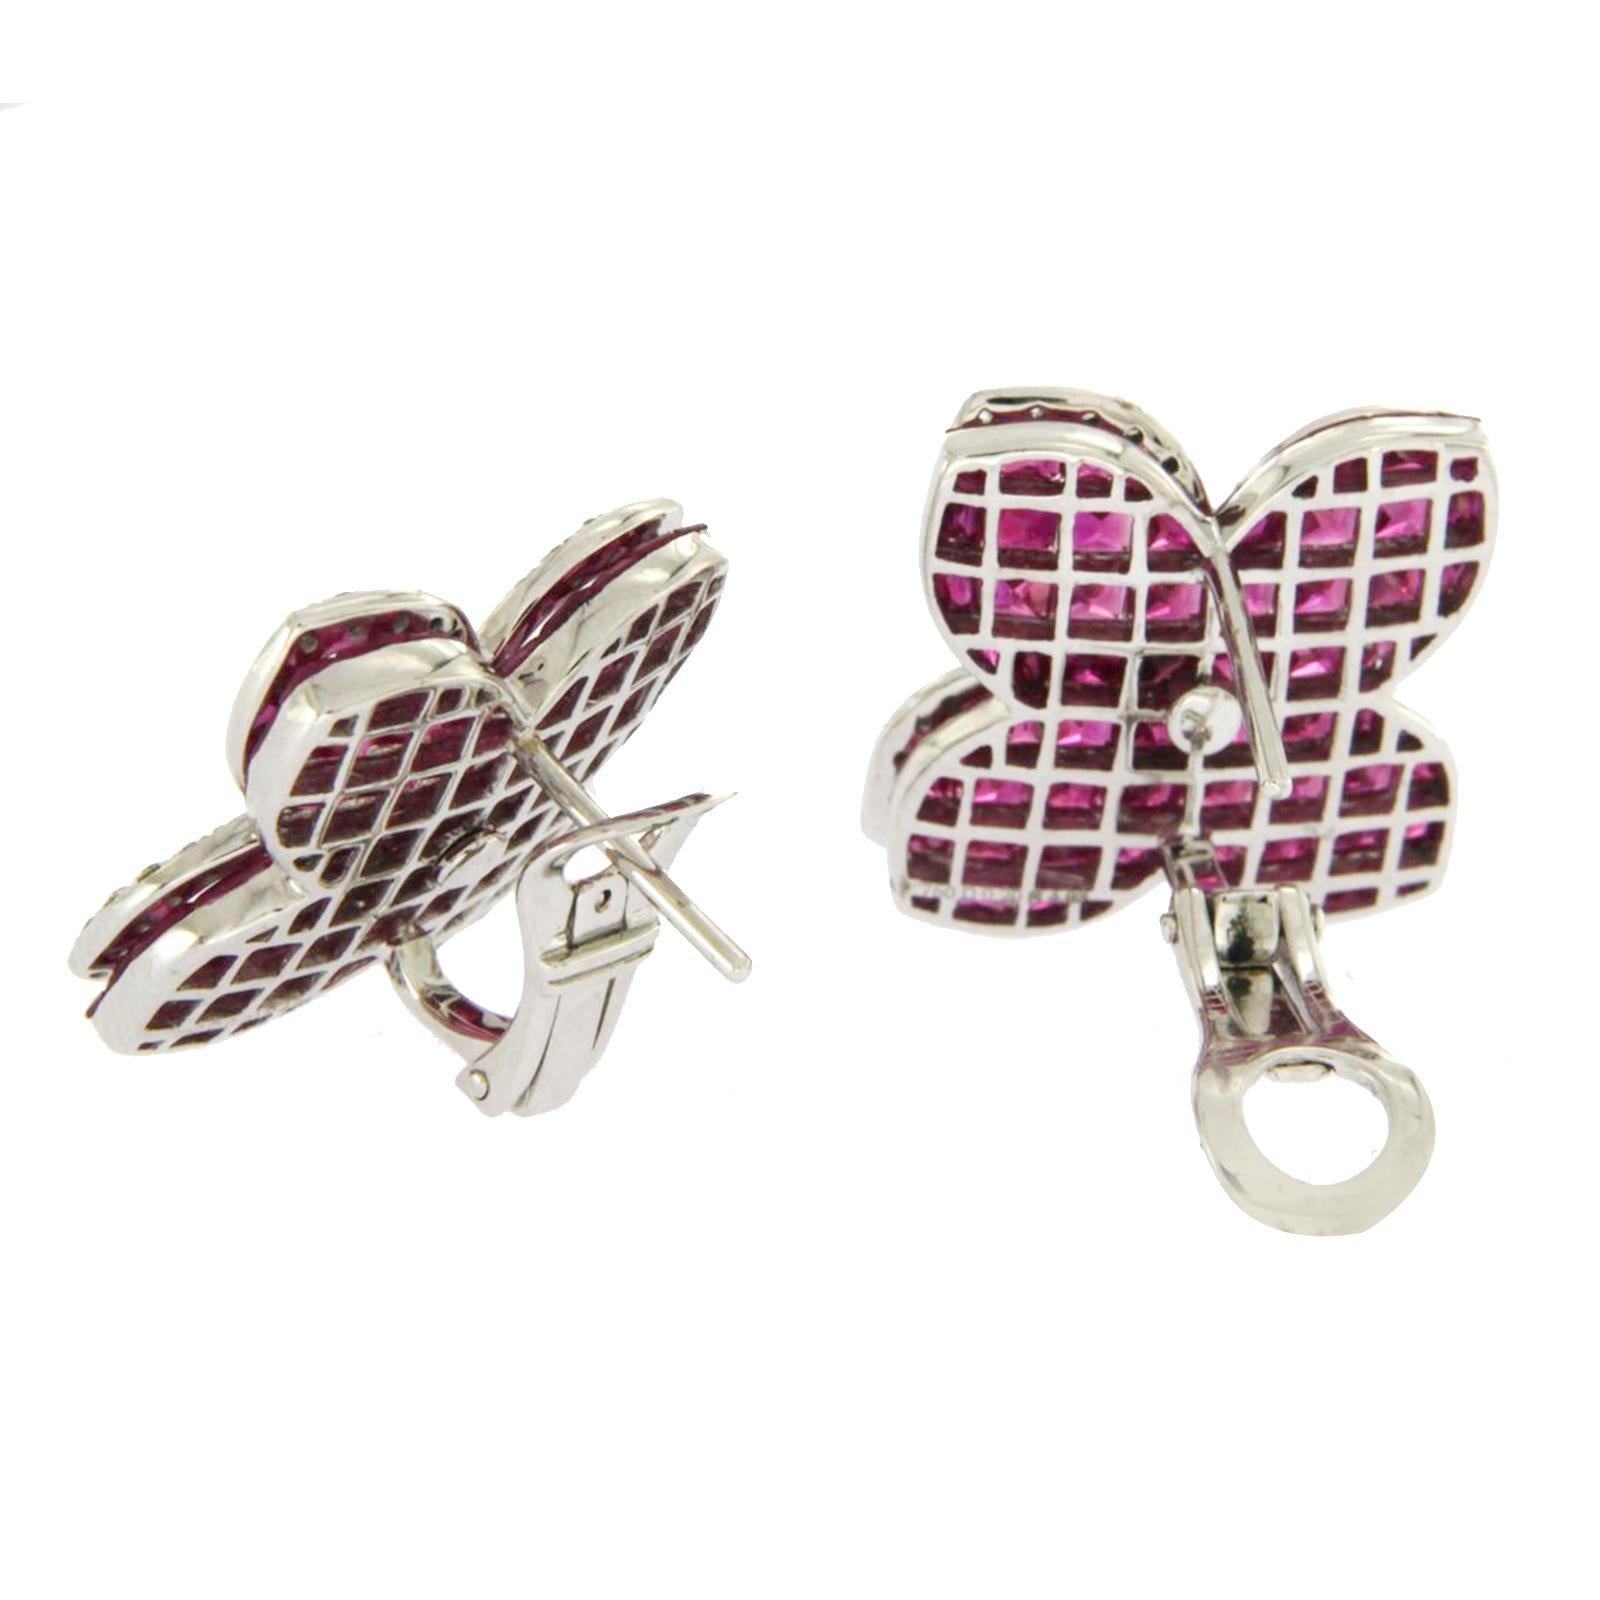 18 Karat White Gold 0.32 Carat Diamonds and Invisible 9.86 Carat Ruby Earrings For Sale 3